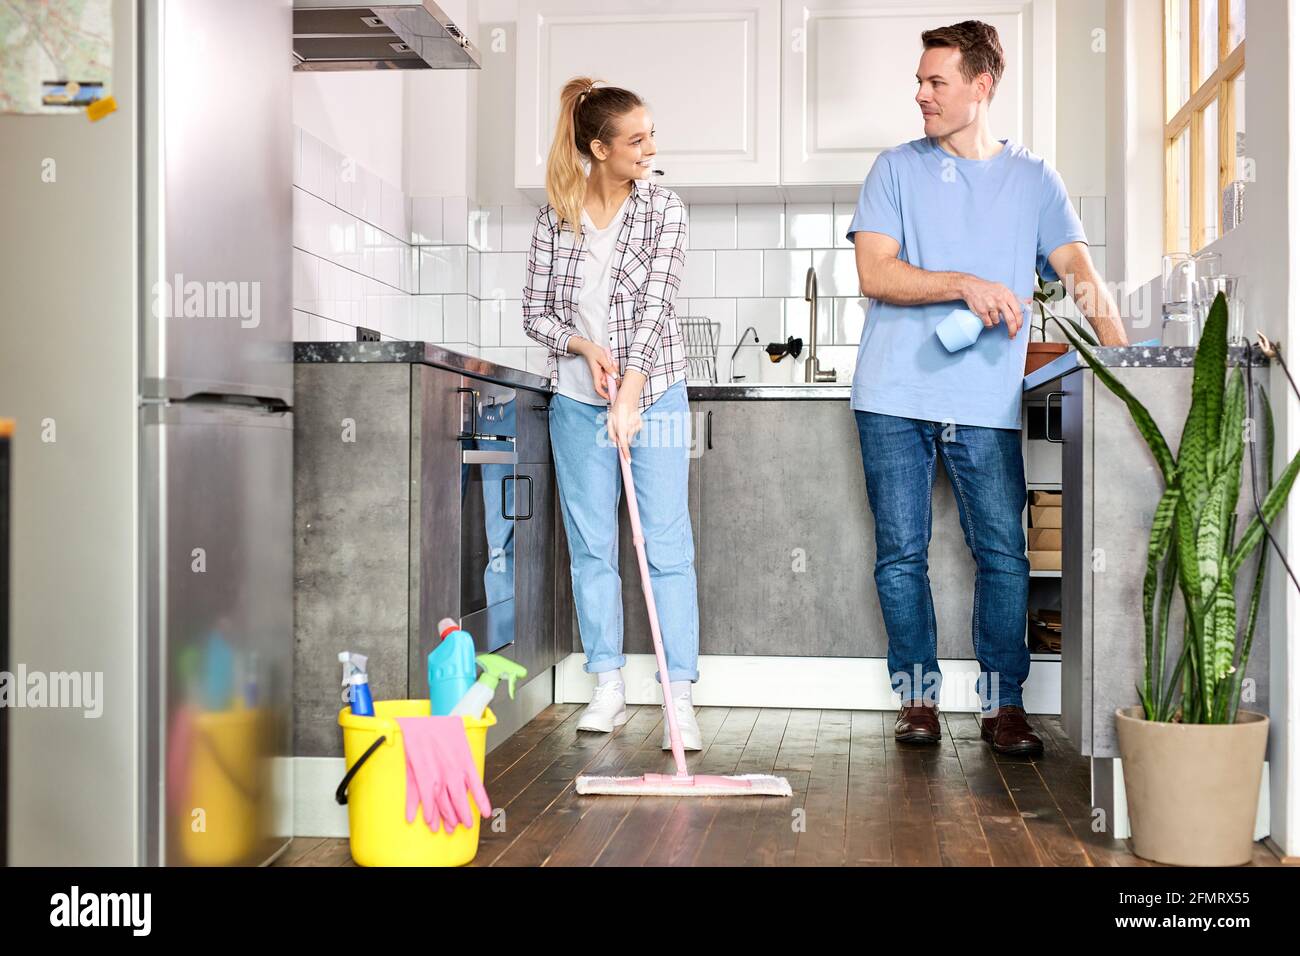 Young Janitors Cleaning Kitchen And Mopping Floor At Home, Caucasian Man And Woman In Casual Weae Enjoy Housekeeping, Cleaning Flat Apartment Stock Photo